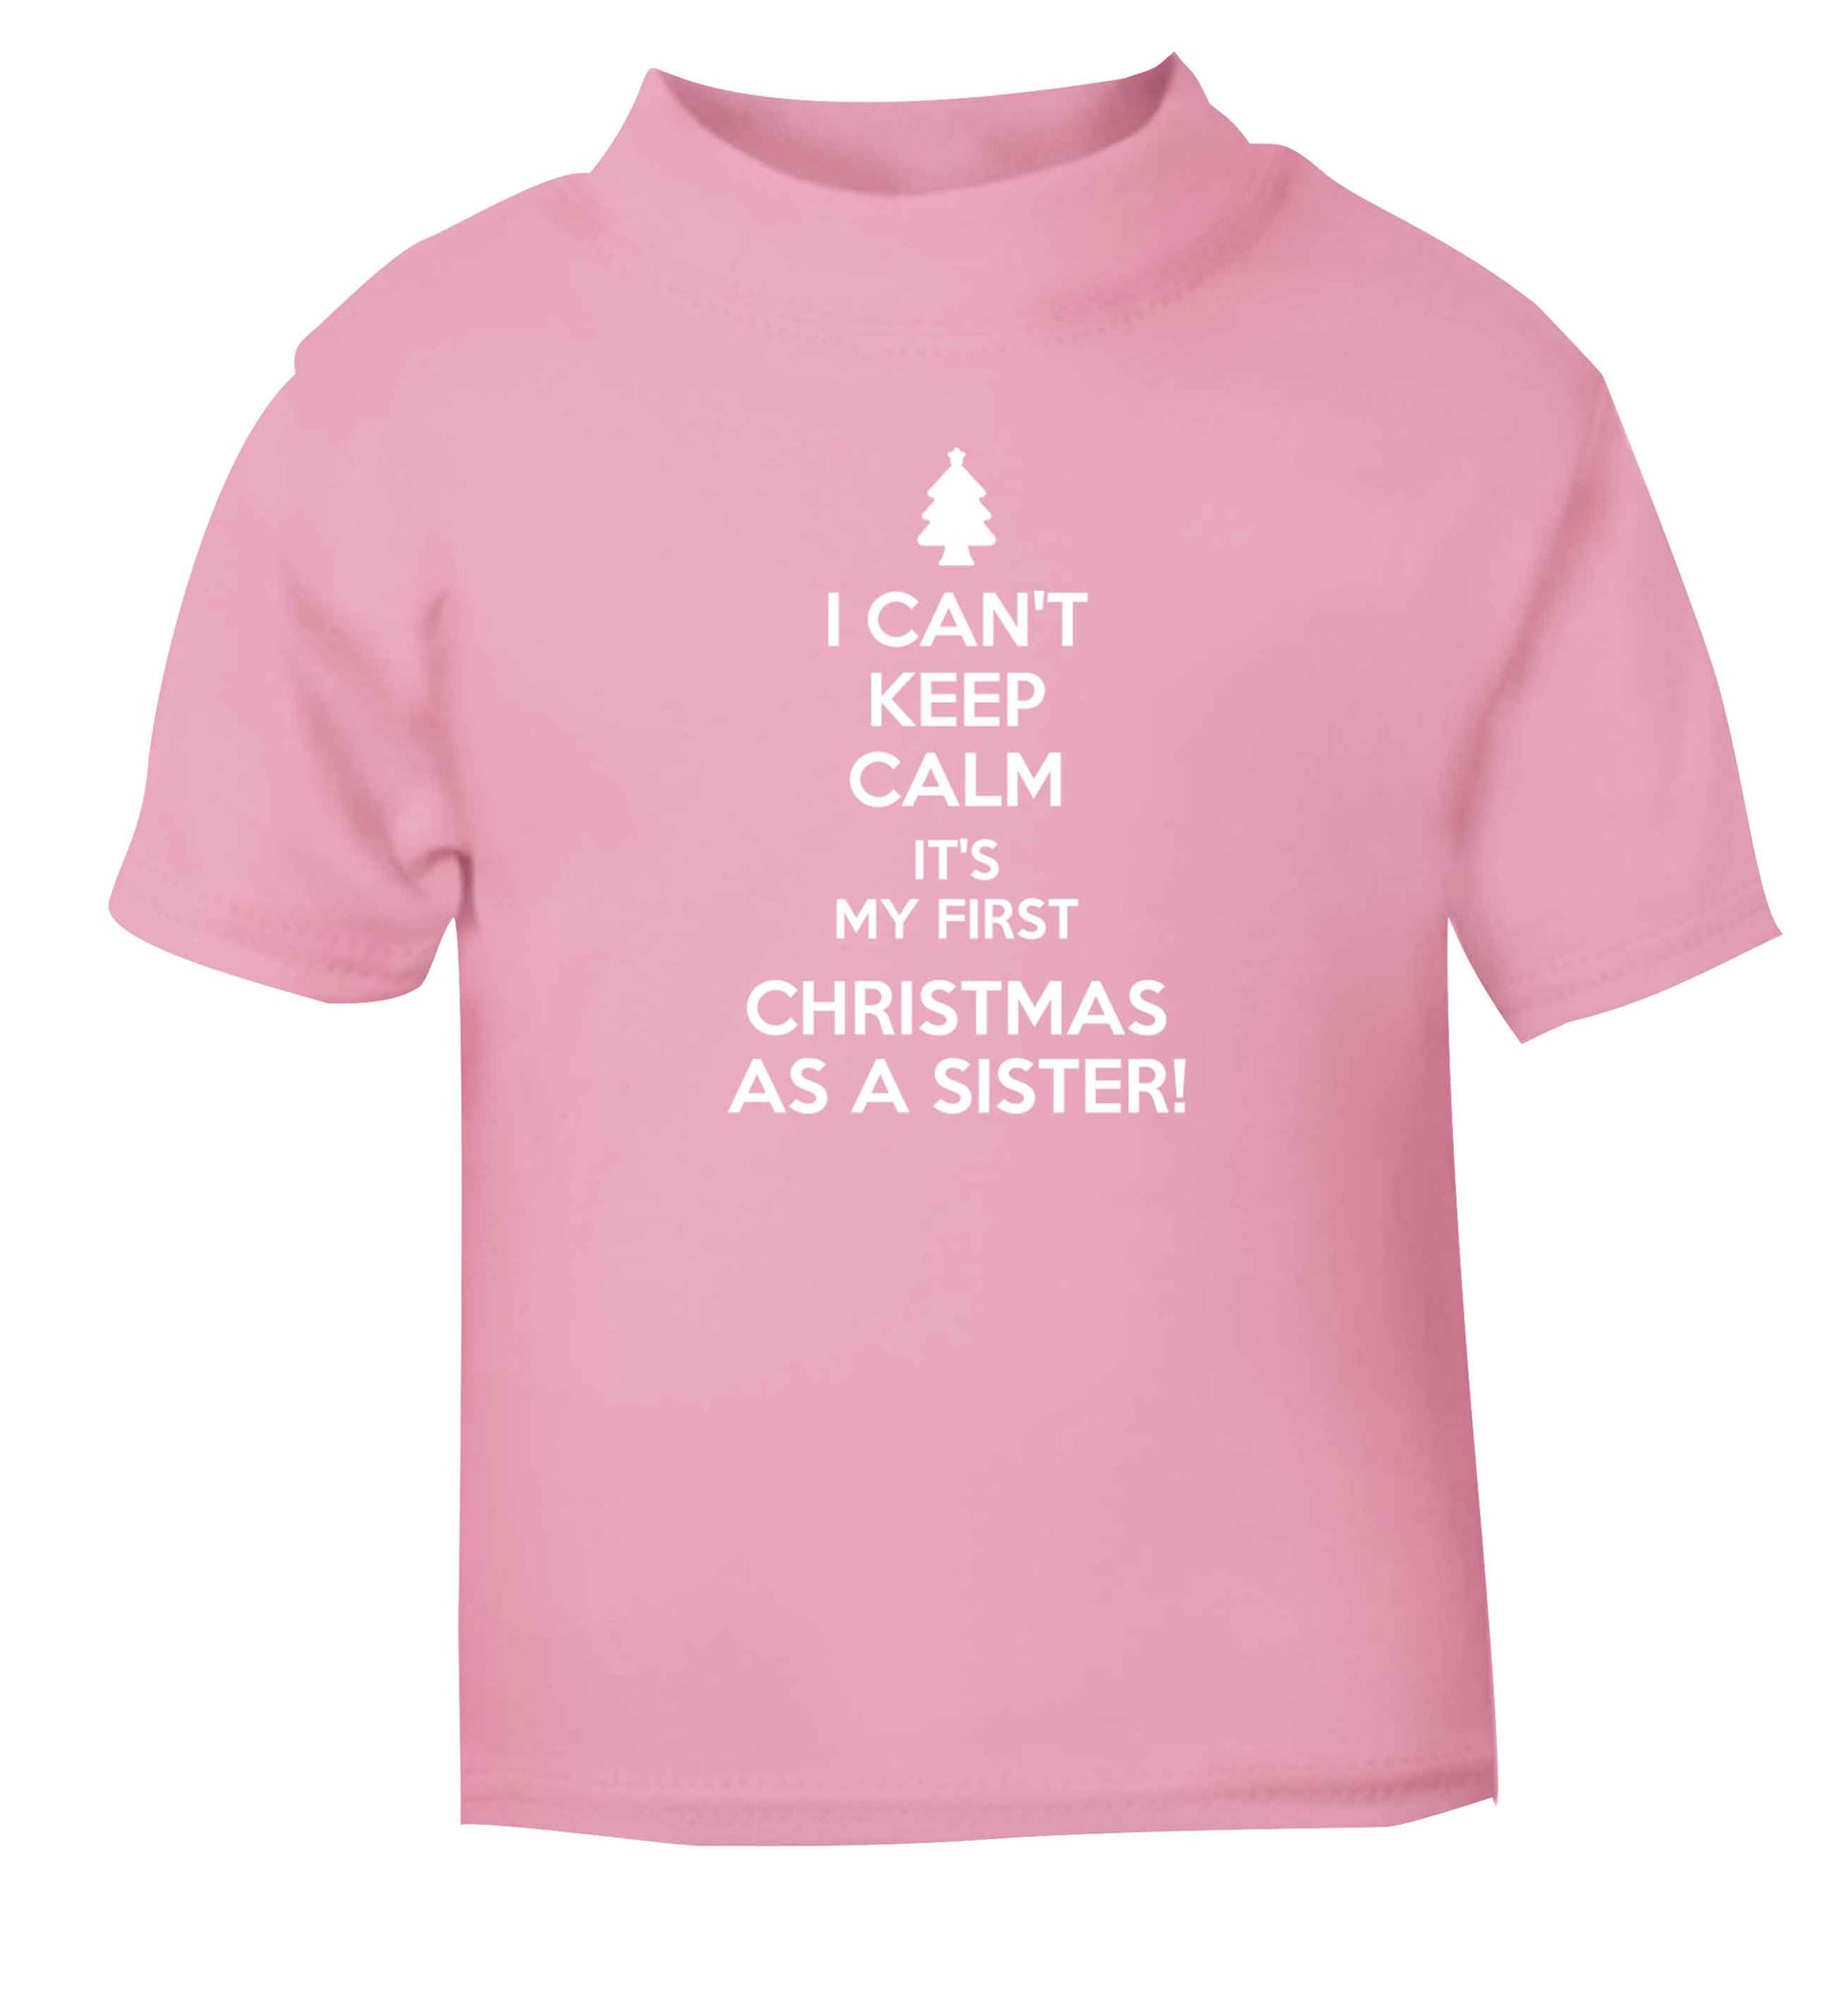 I can't keep calm it's my first Christmas as a sister! light pink Baby Toddler Tshirt 2 Years